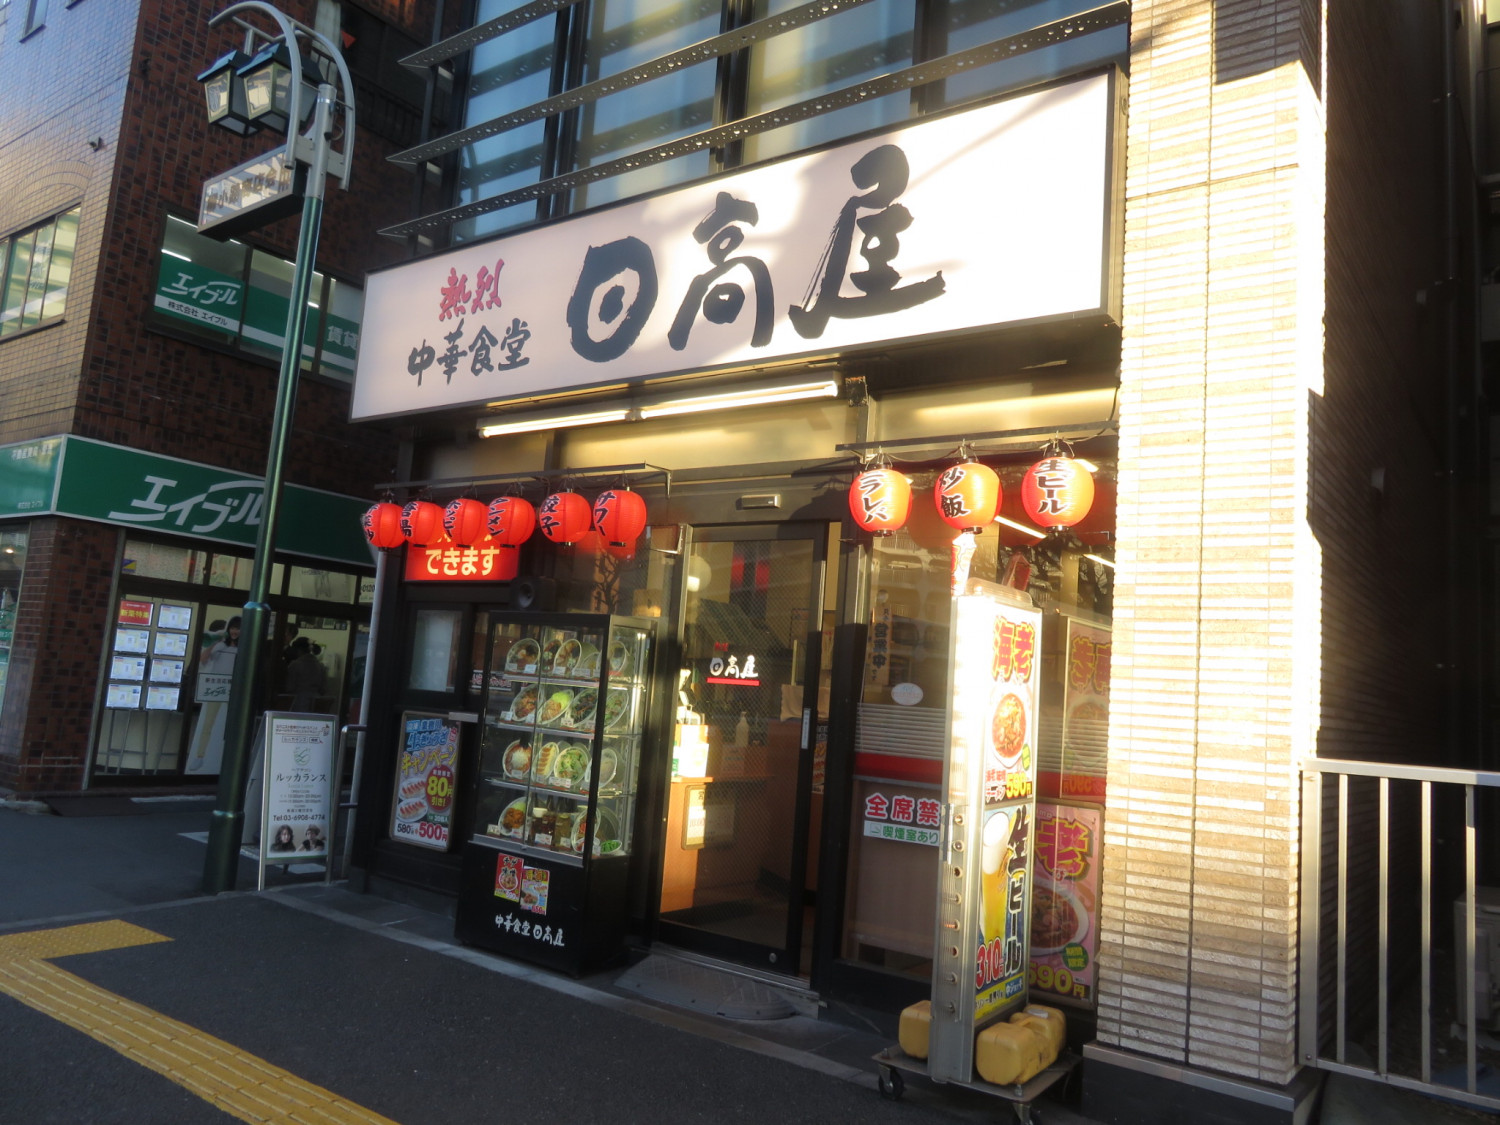 6 Restaurants to Get Affordable and Convenient Japanese Food!